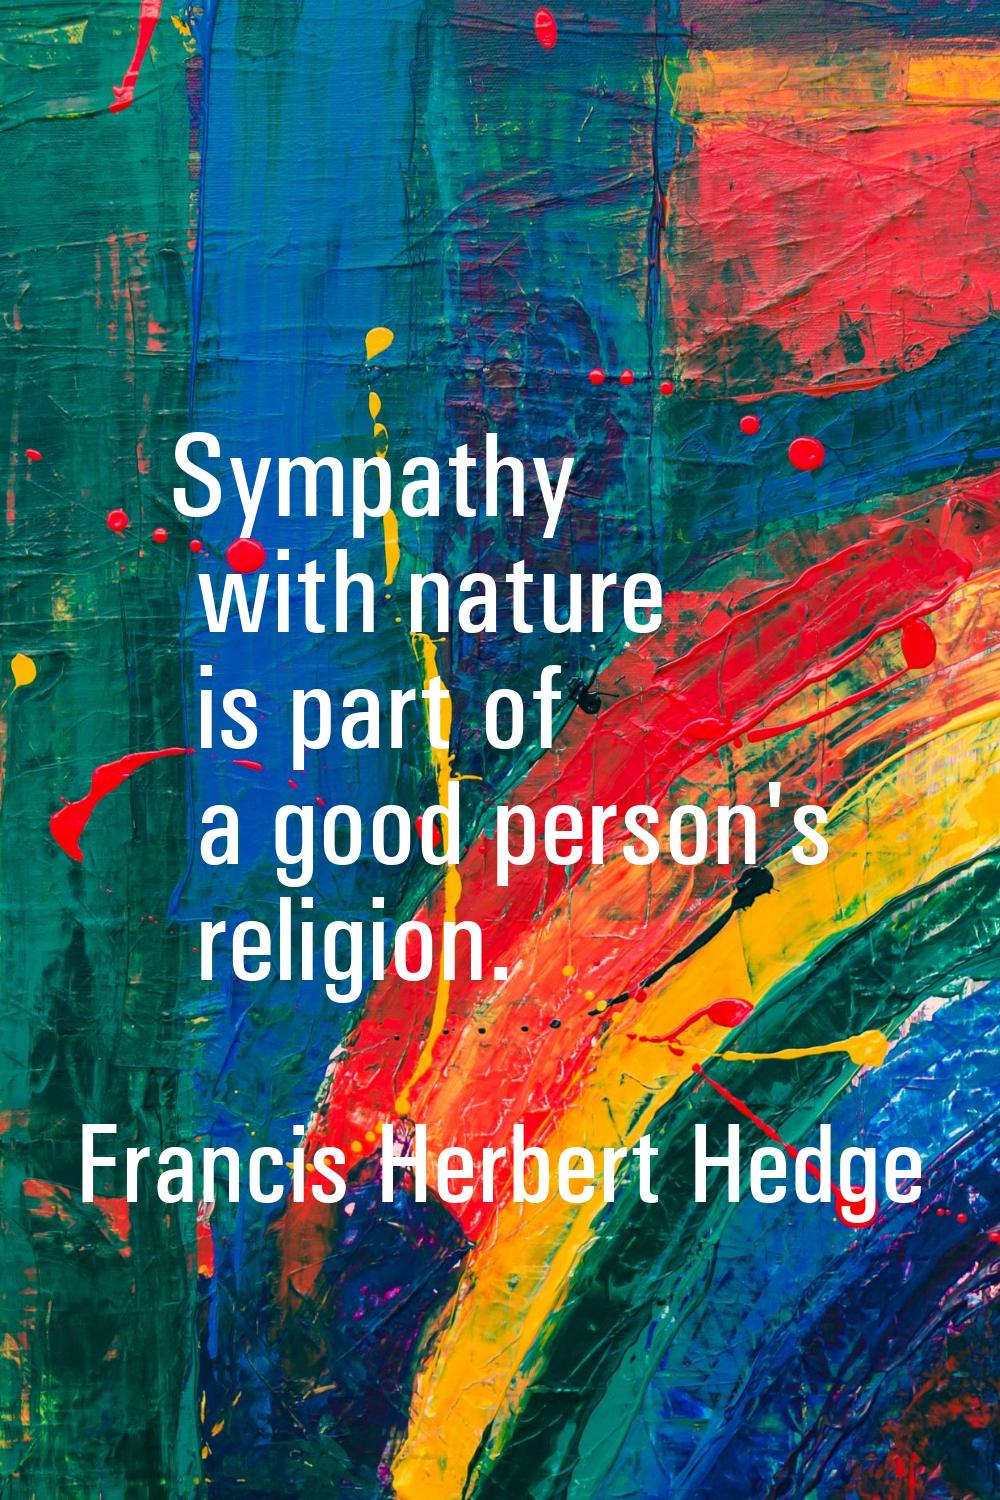 Sympathy with nature is part of a good person's religion.